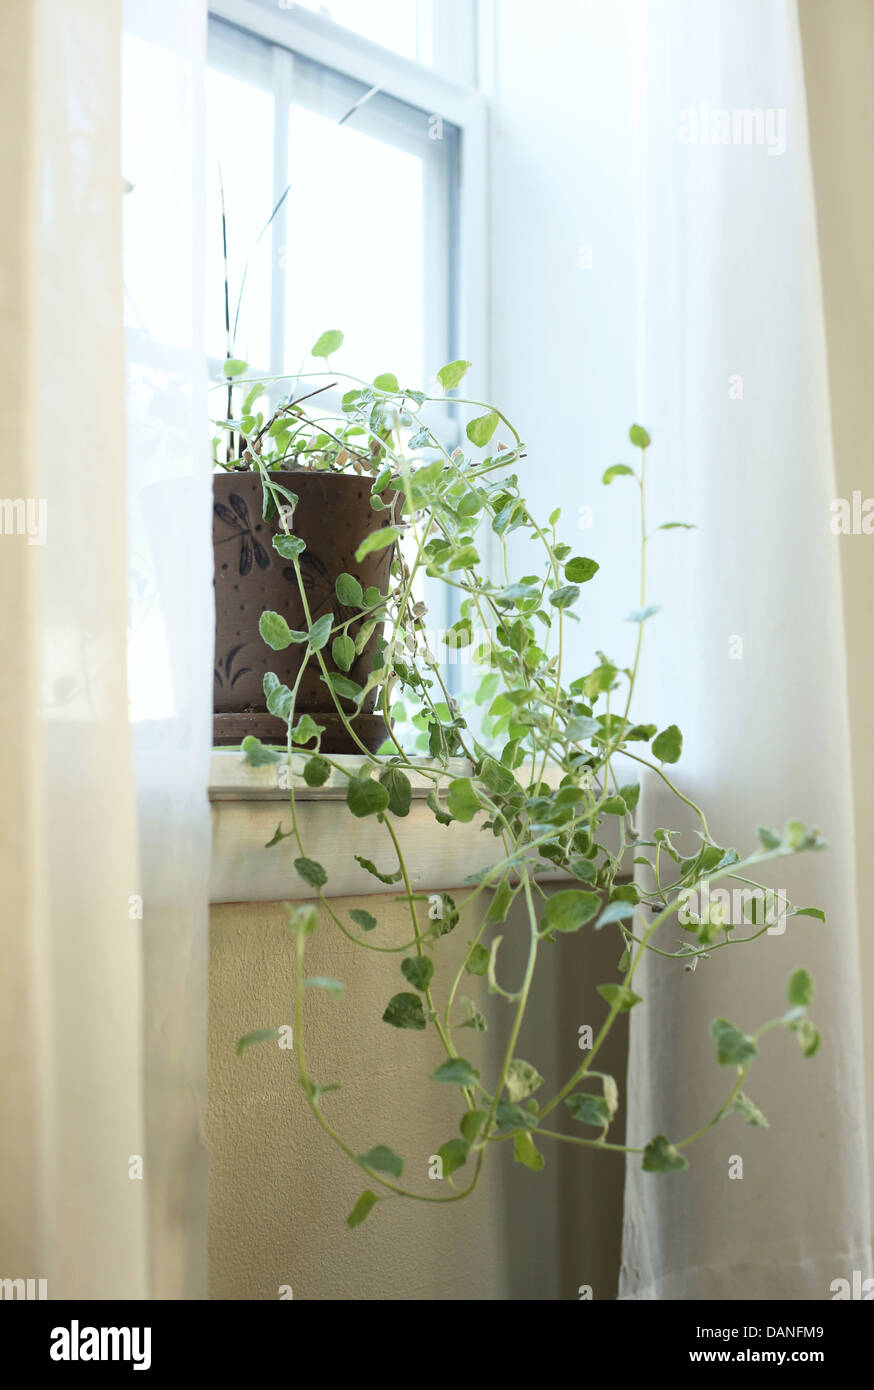 A houseplant spilling out over a windowsill. Stock Photo